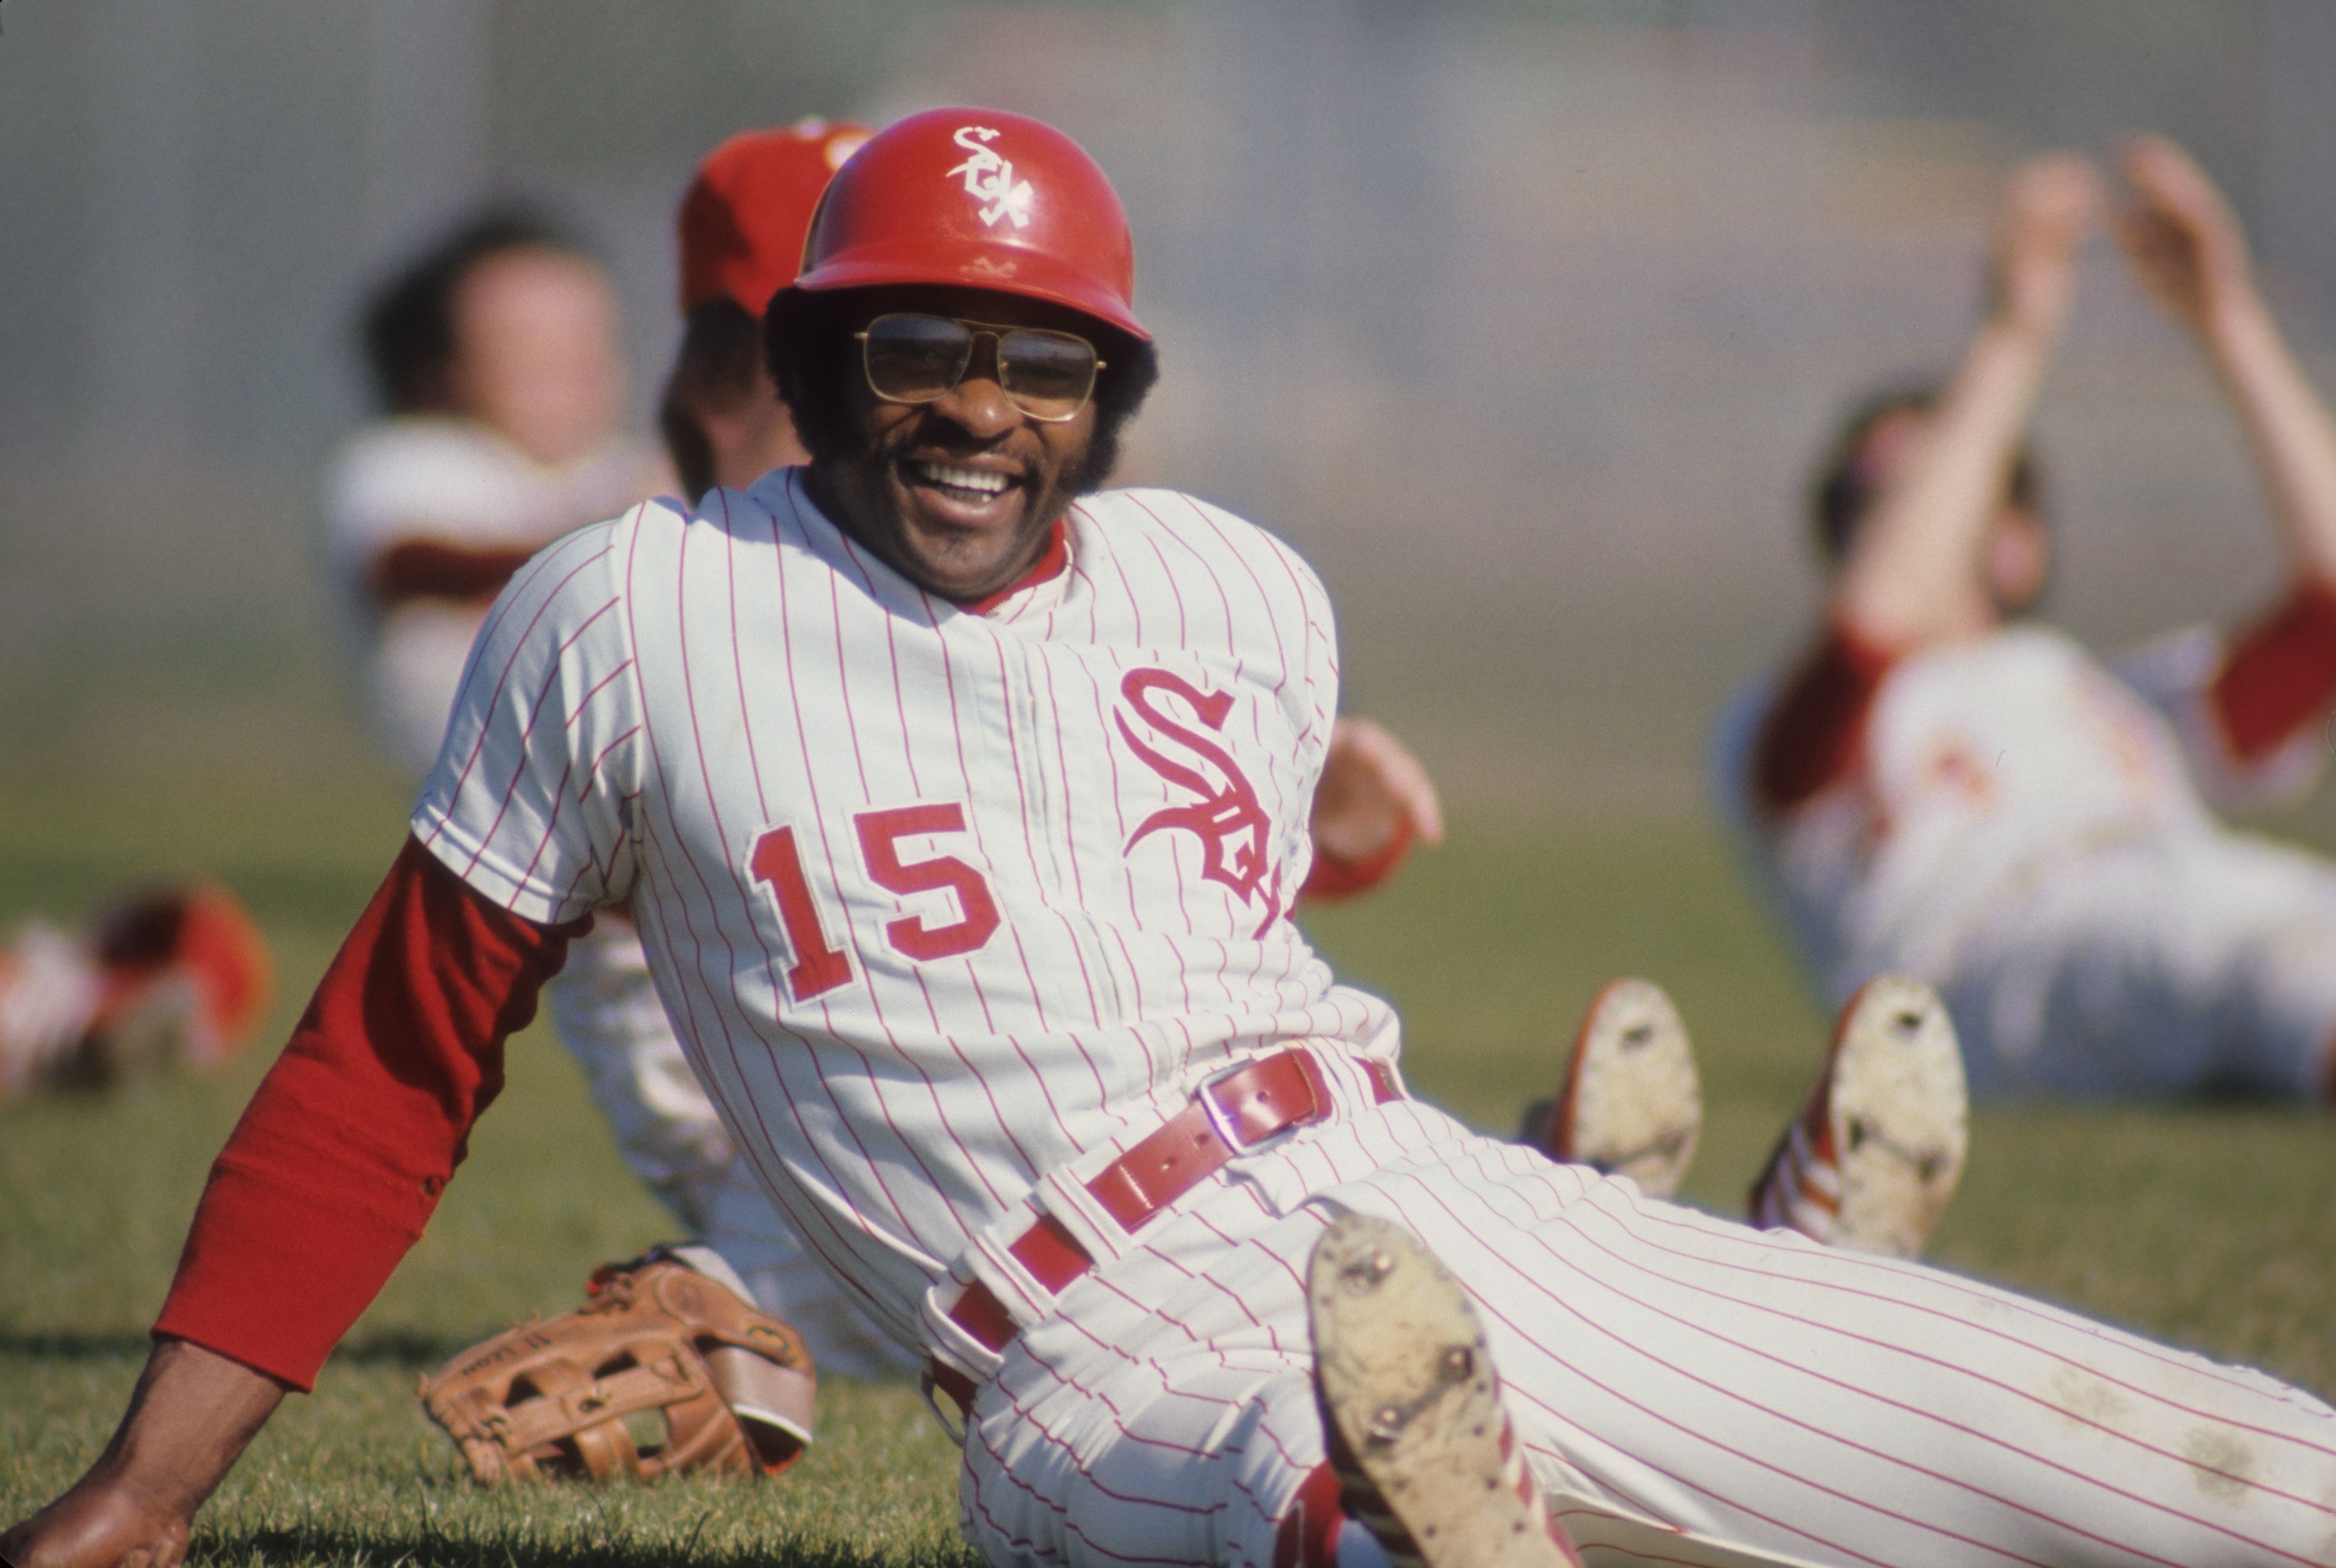 Photo of a baseball player stretching